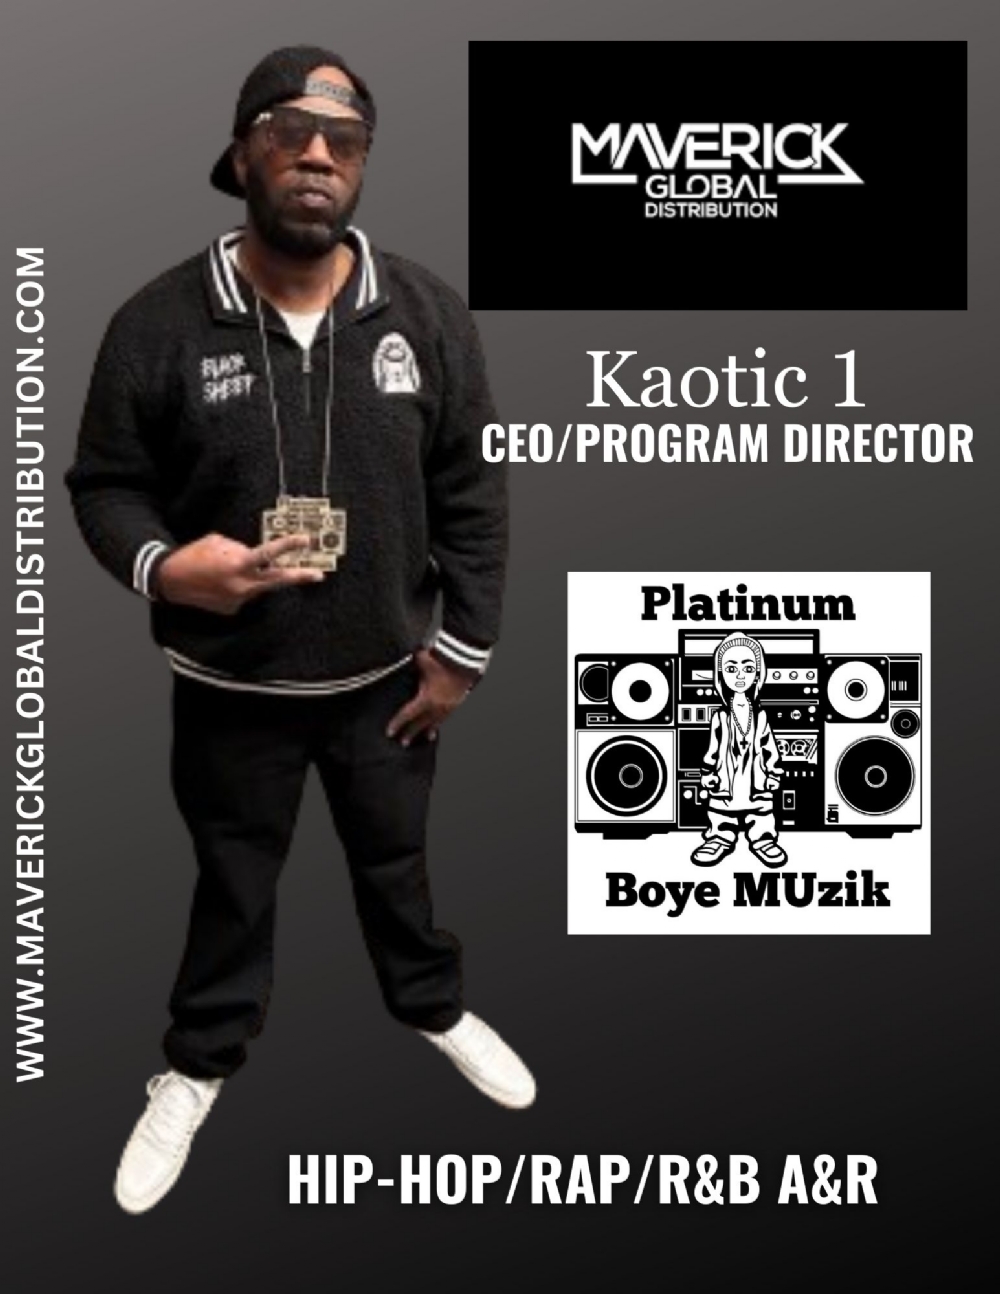 Congrats To Our Program Director Kaotic 1